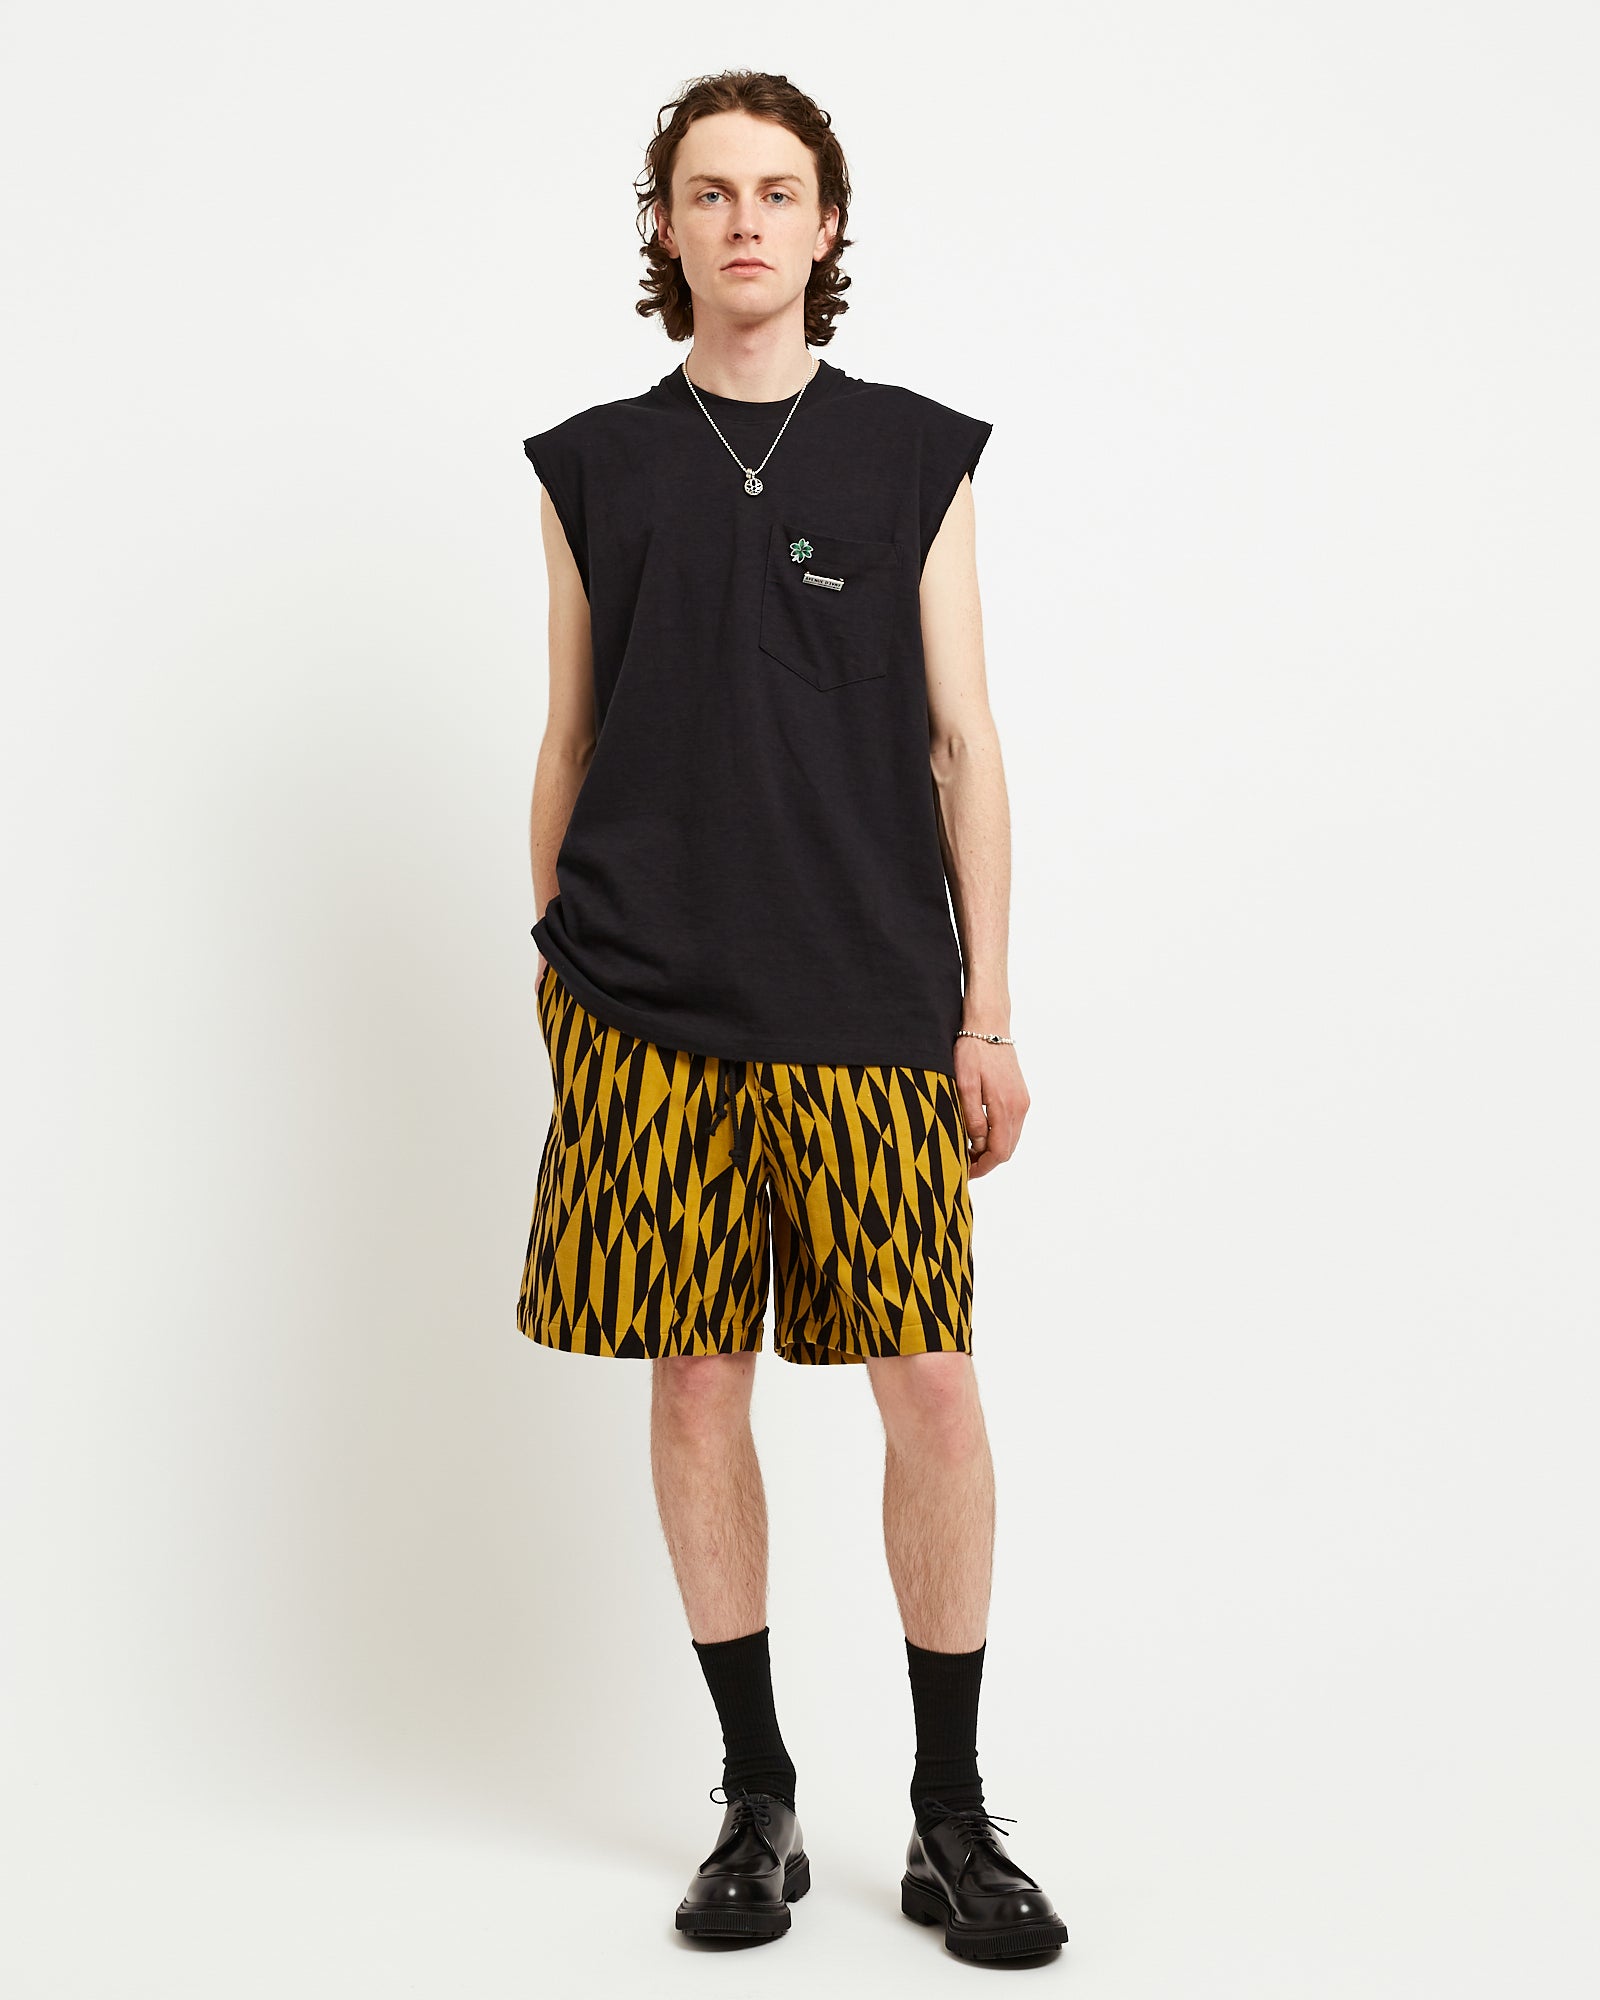 Elasticated Shorts in Yellow/Black